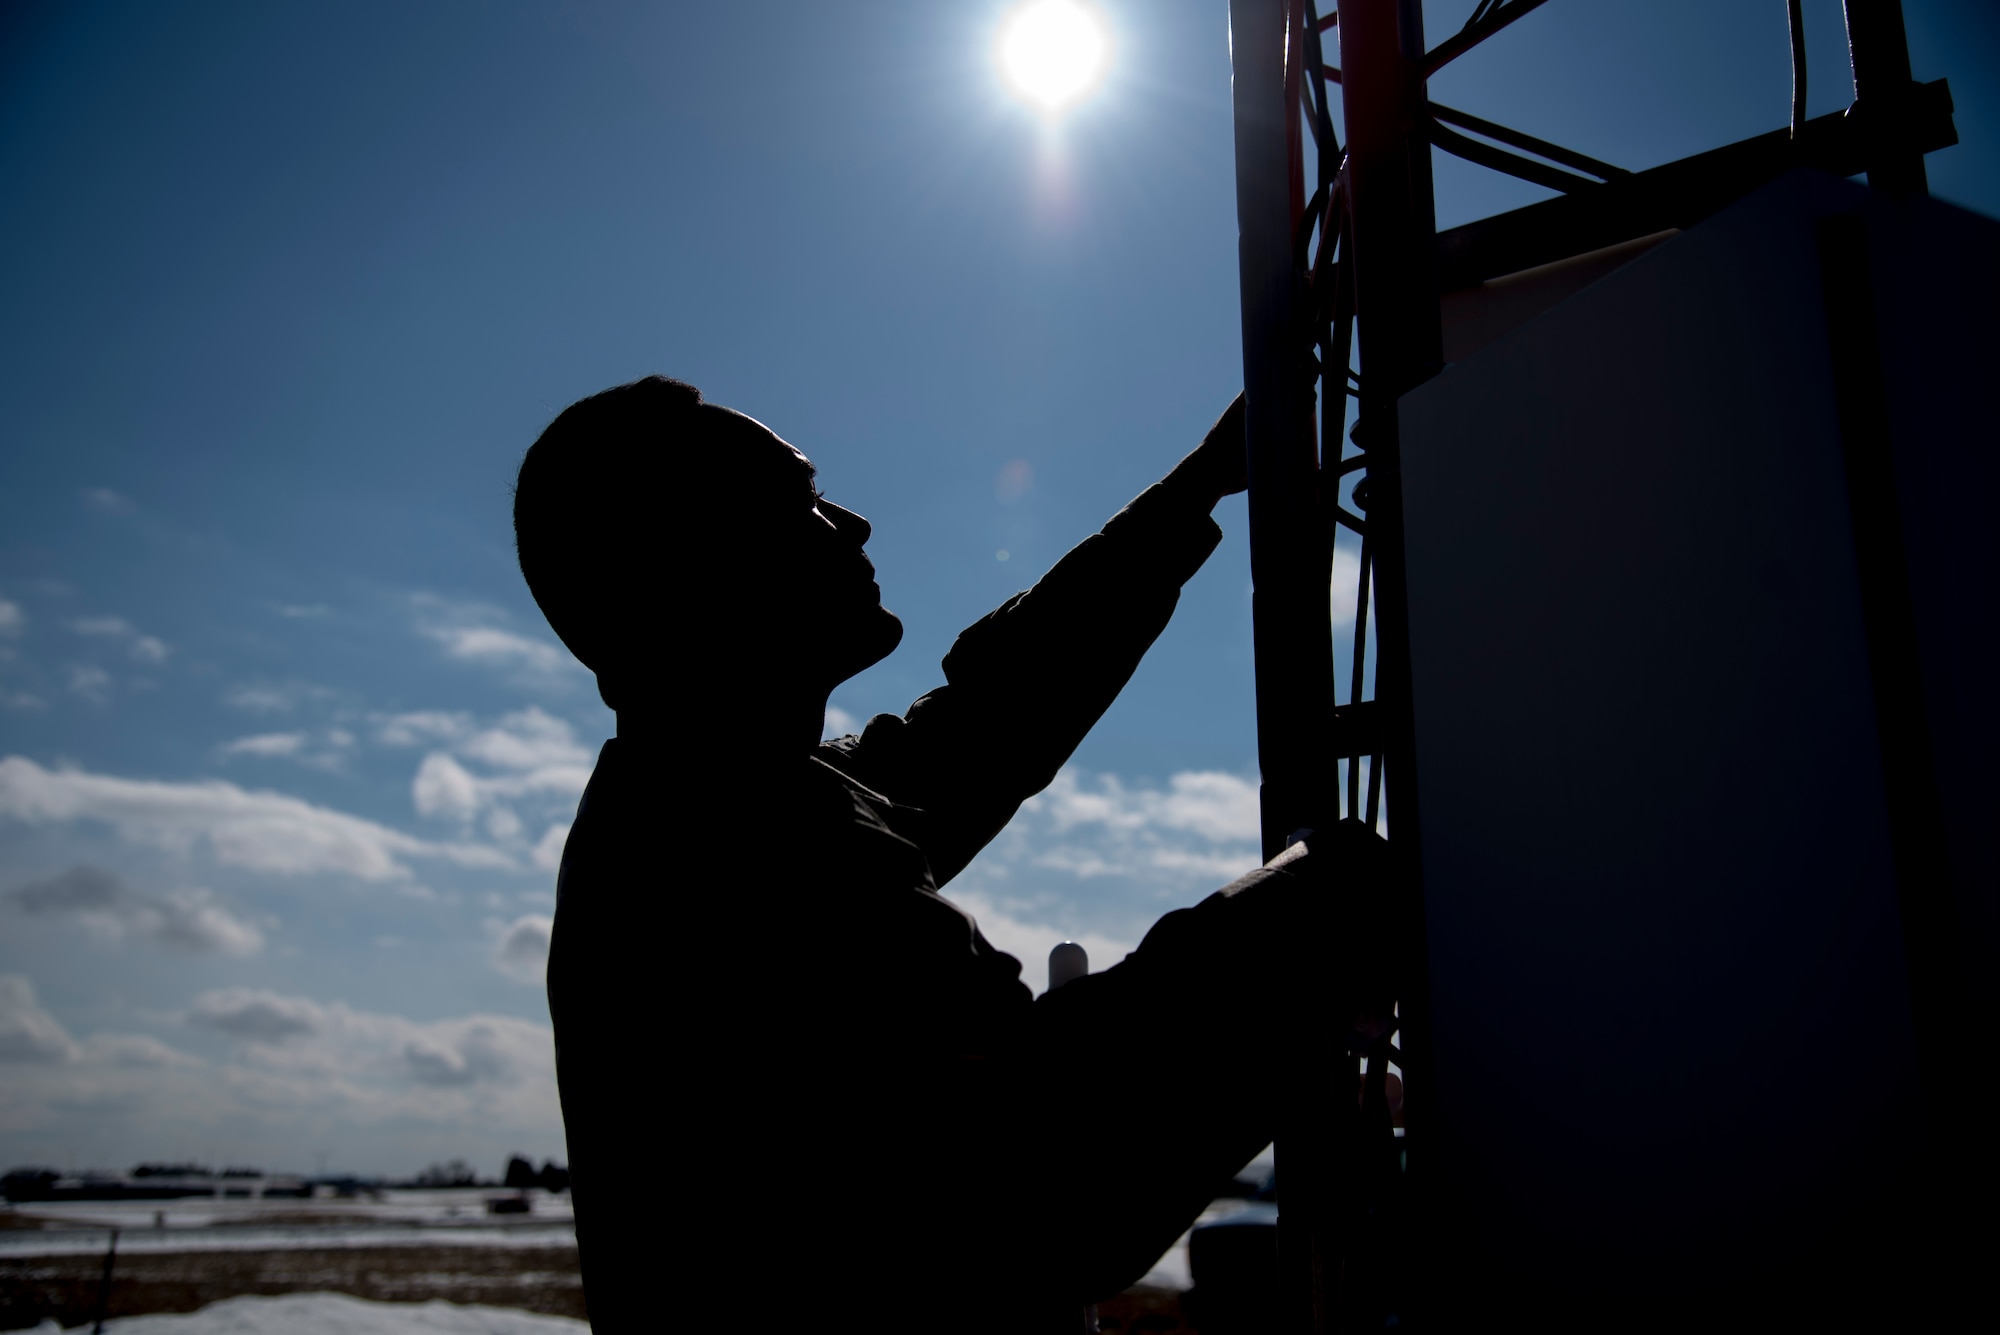 U.S. Air Force Airman 1st Class Christopher Blackwell, a 35th Operations Support Squadron airfield systems technician, climbs an AN/FMQ 19 at Misawa Air Base, Japan, Feb. 27, 2017. The AN/FMQ 19 is an integrated system of weather sensors that measure, collect and disseminate meteorological data to help pilots, weather personnel and air traffic controllers prepare and monitor weather forecasts. By Airfield systems Airmen enable, F-16 Fighting Falcons to contribute to Pacific Air Forces’ mission to deter aggression with allies and maintain peace and stability in the Indo-Asia- Pacific region. (U.S. Air Force photo by Airman 1st Class Sadie Colbert)